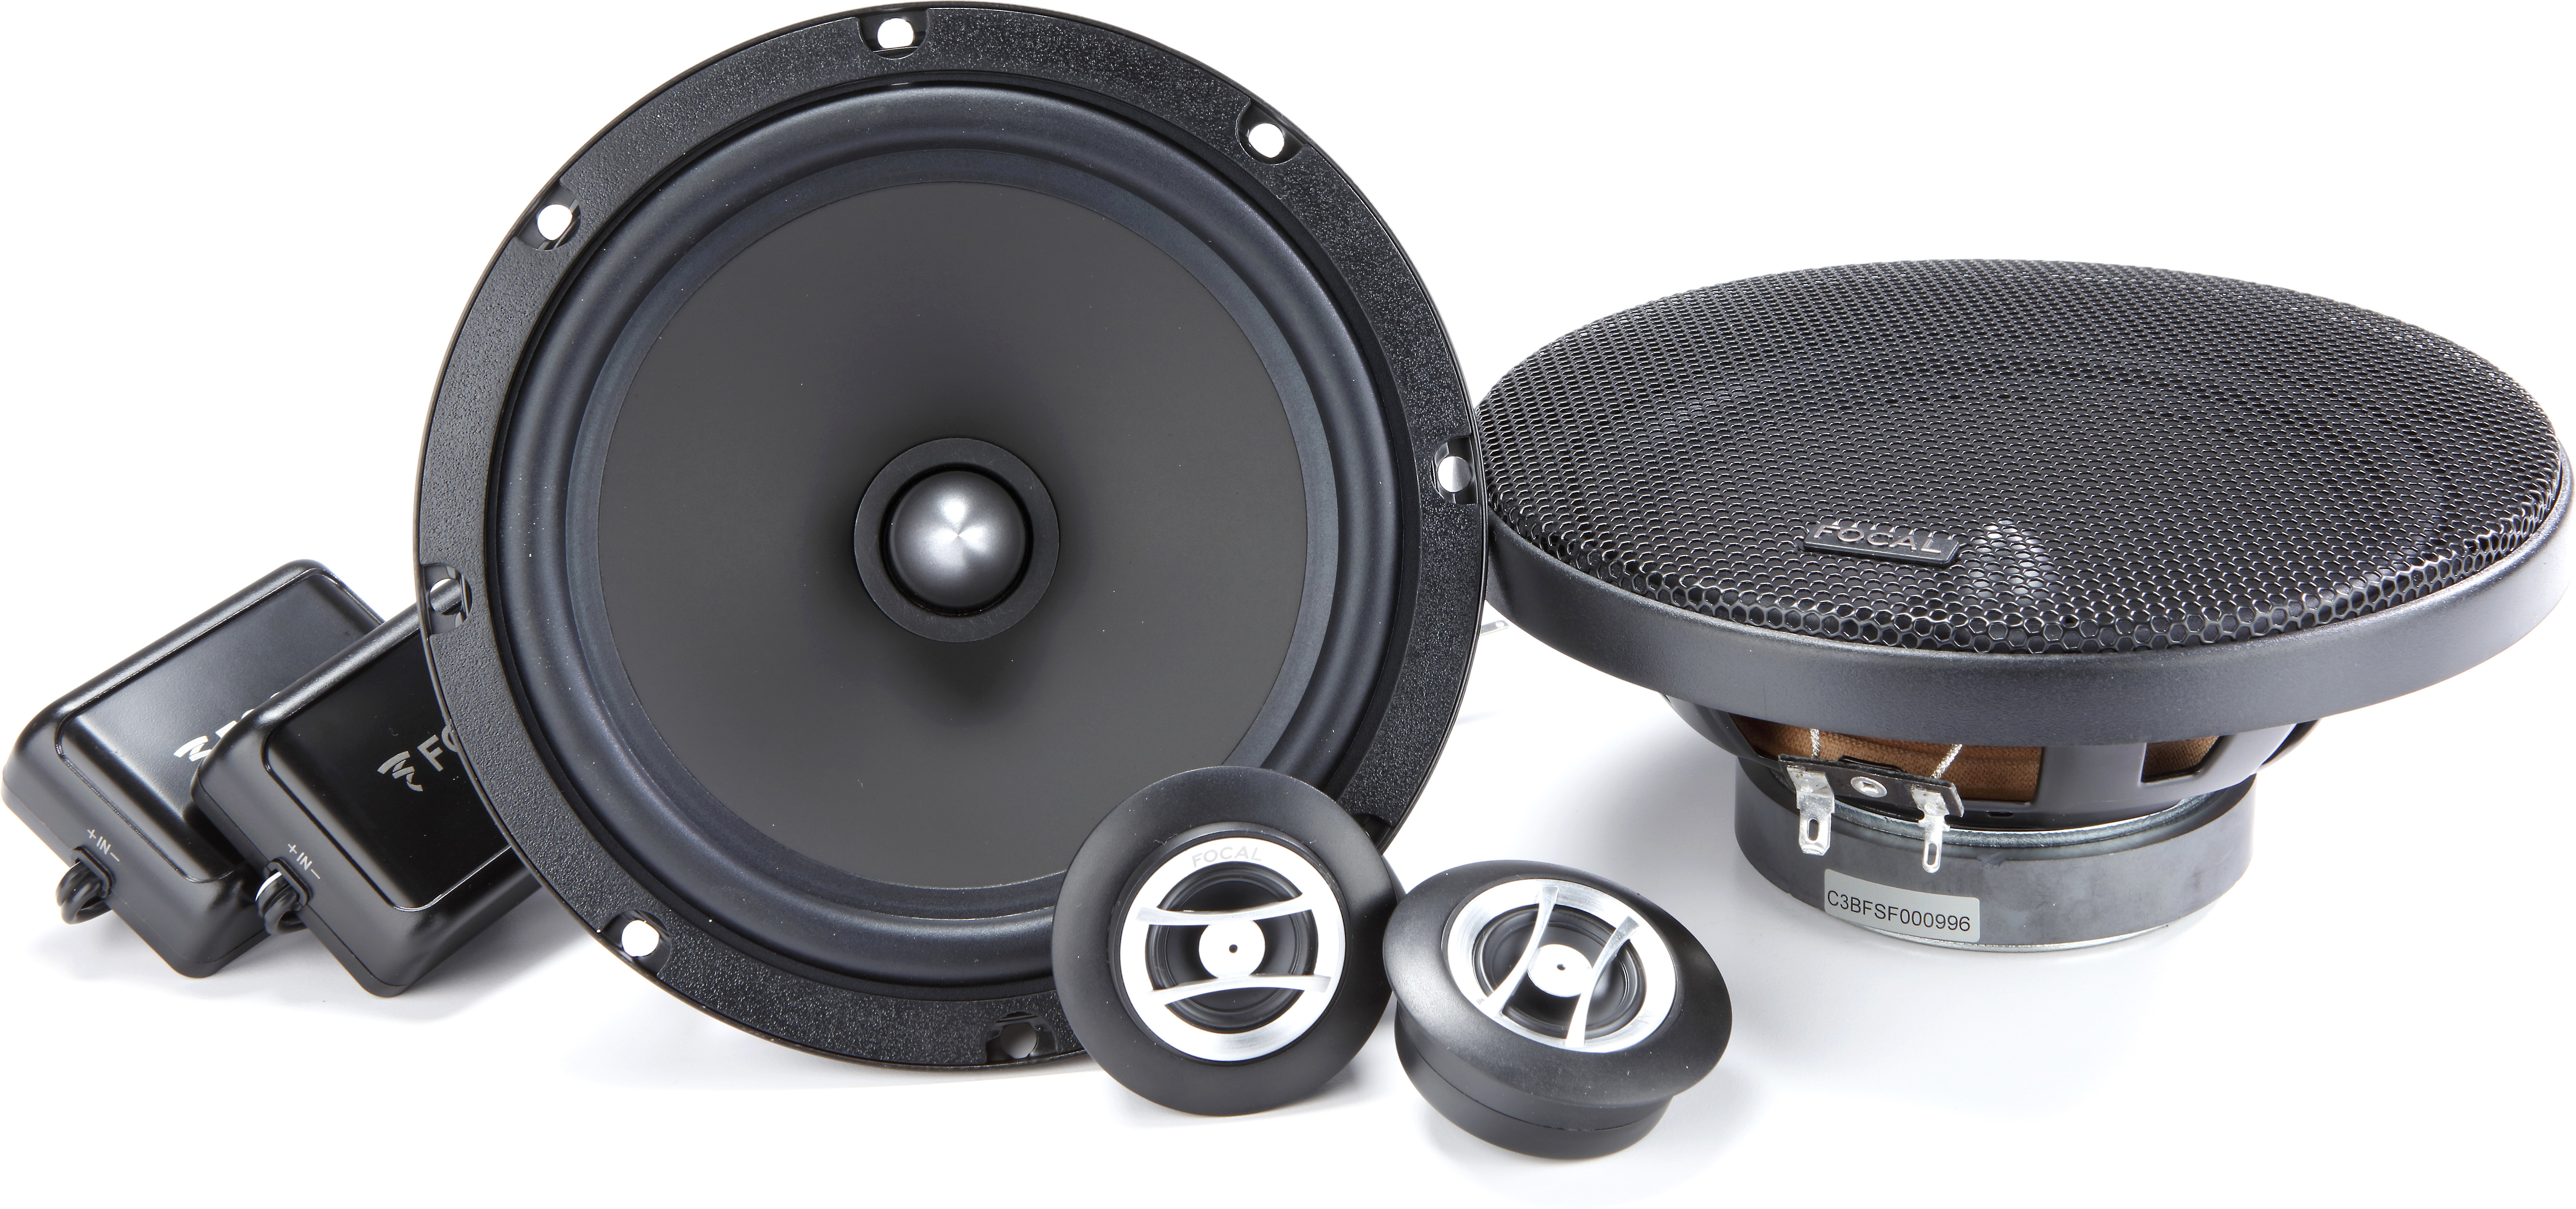 Focal Component Speakers at Crutchfield